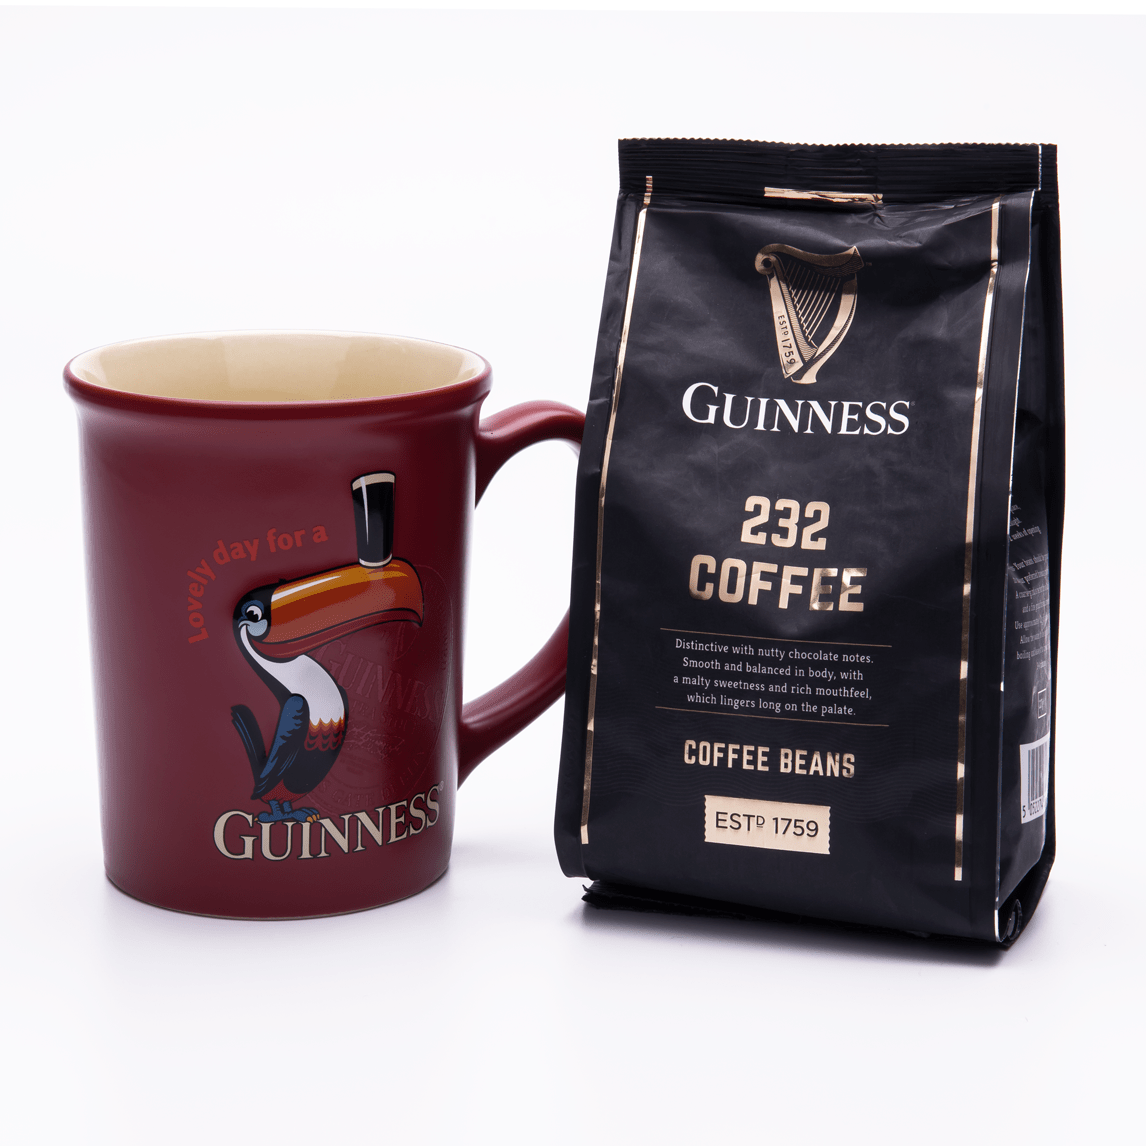 Guinness UK Guinness Toucan & Coffee Set with a toucan on it.